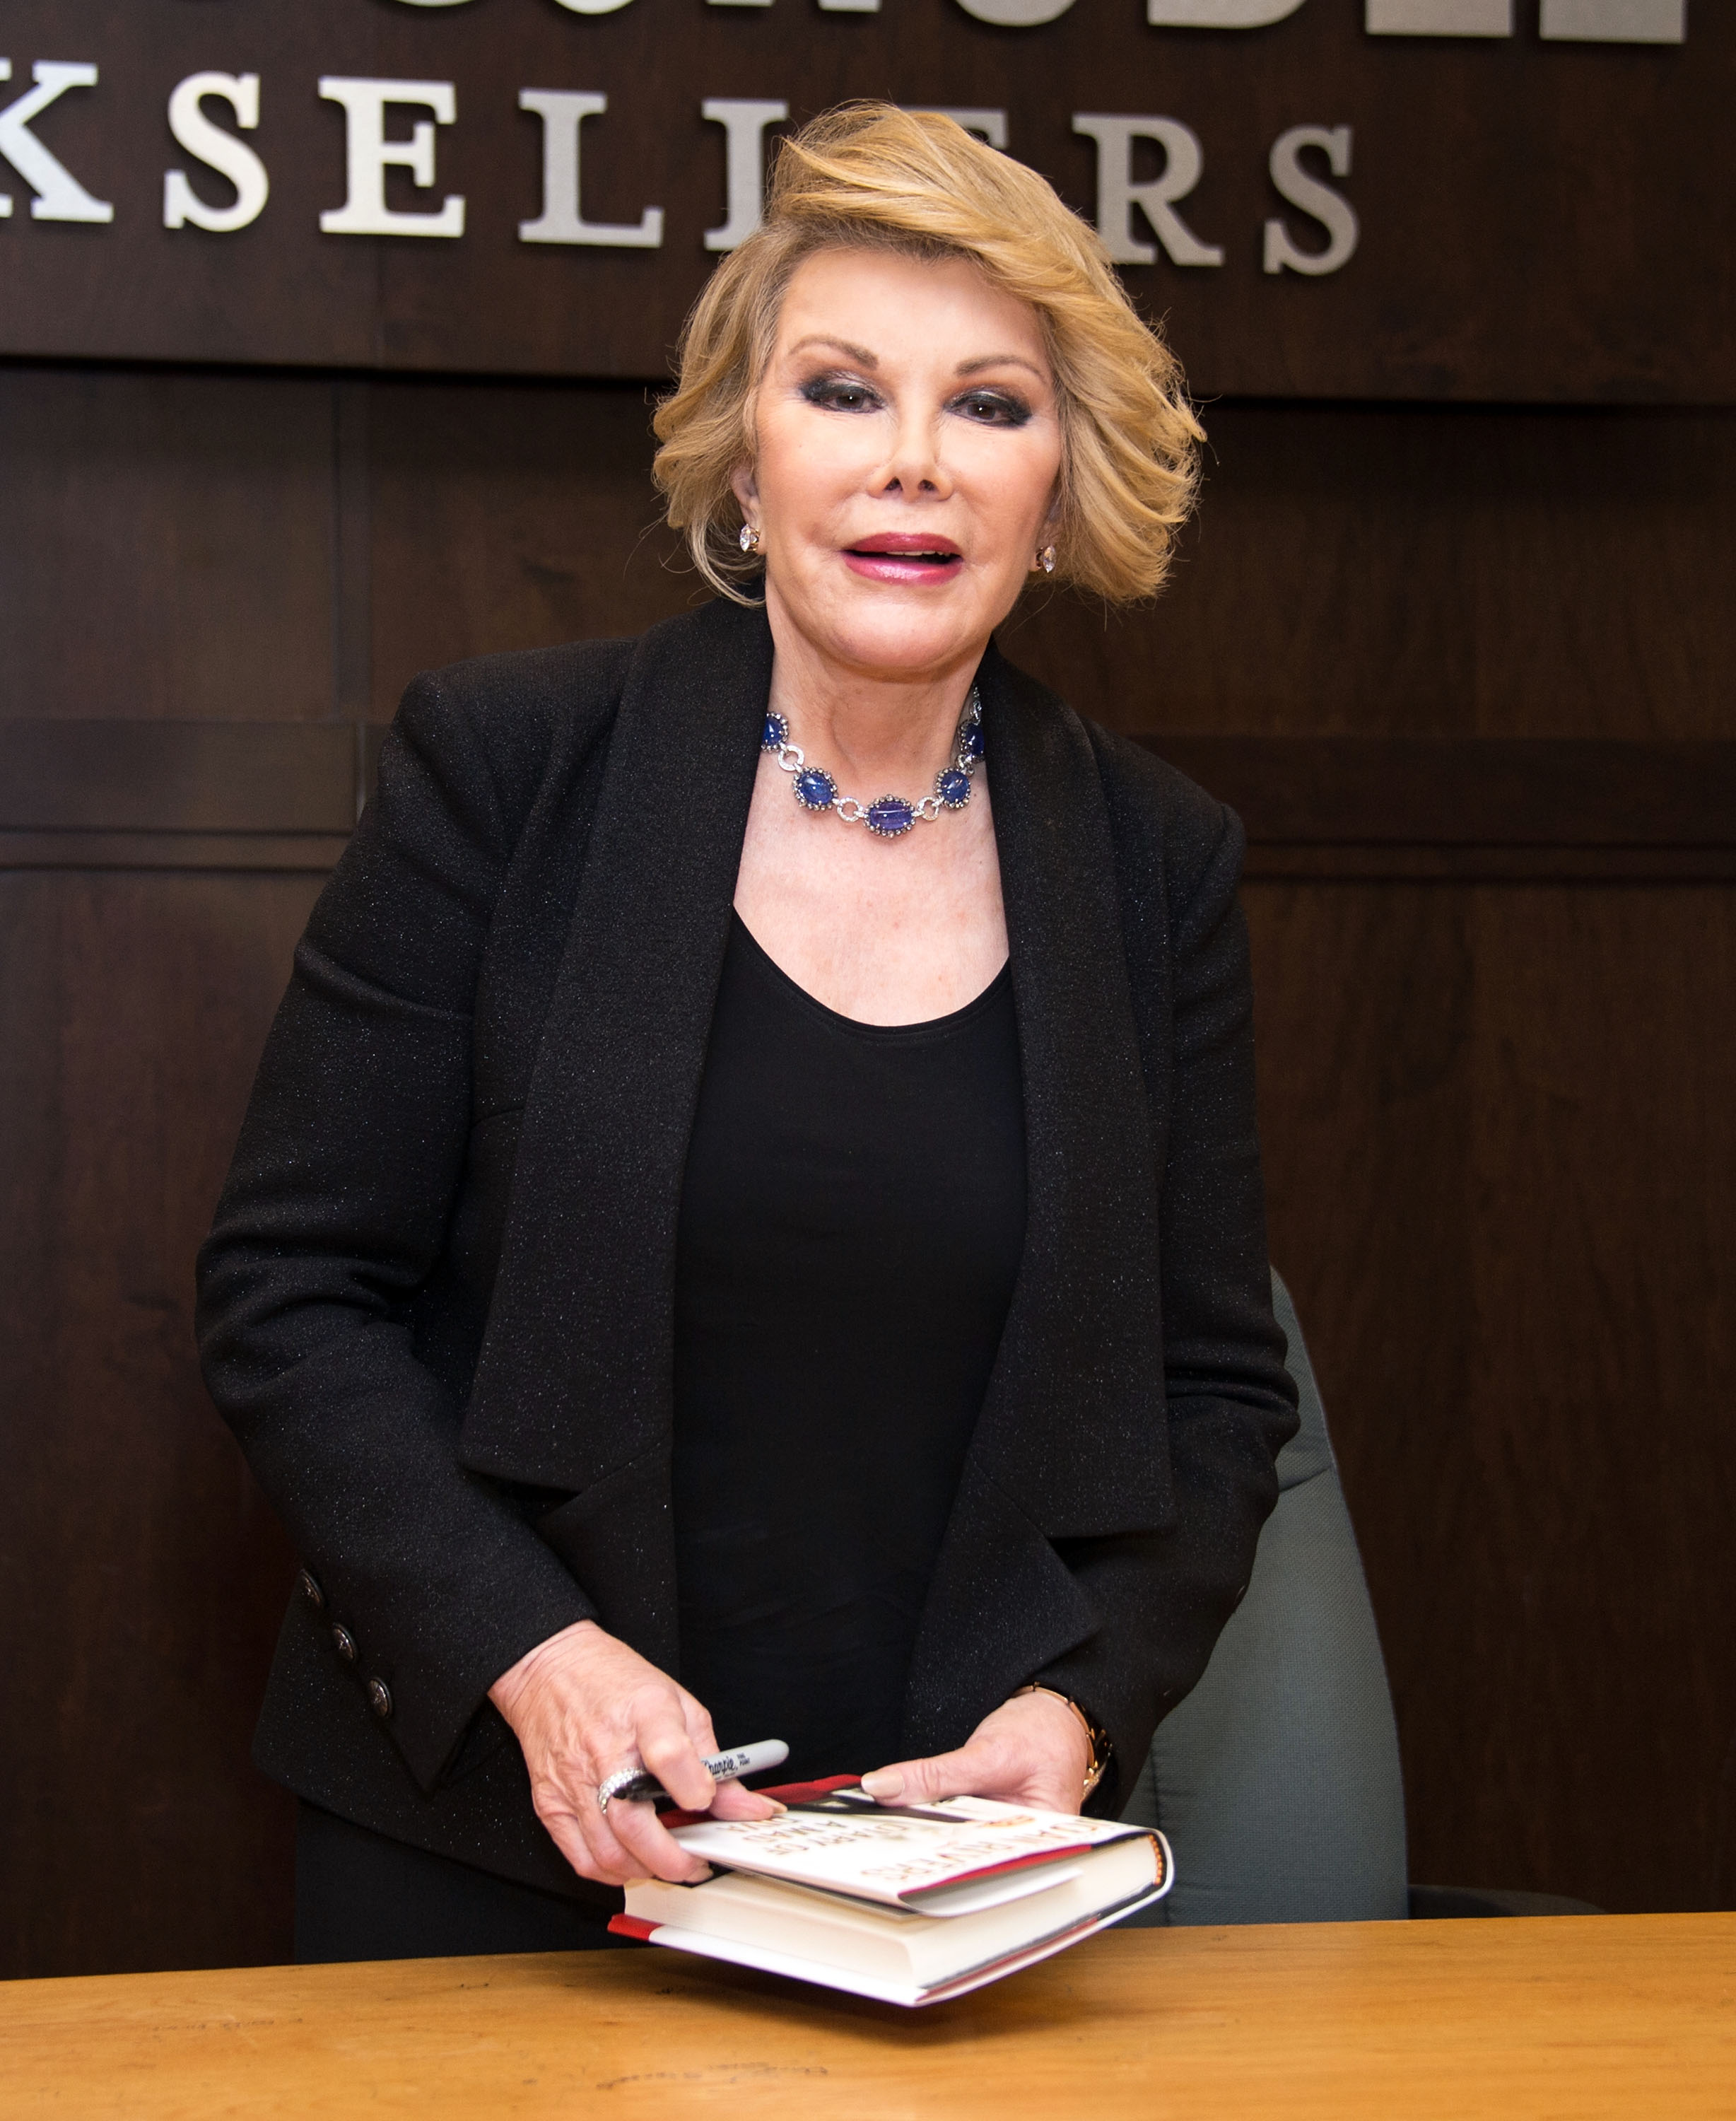 Joan Rivers Signs And Discusses Her New Book "Diary Of A Mad Diva"